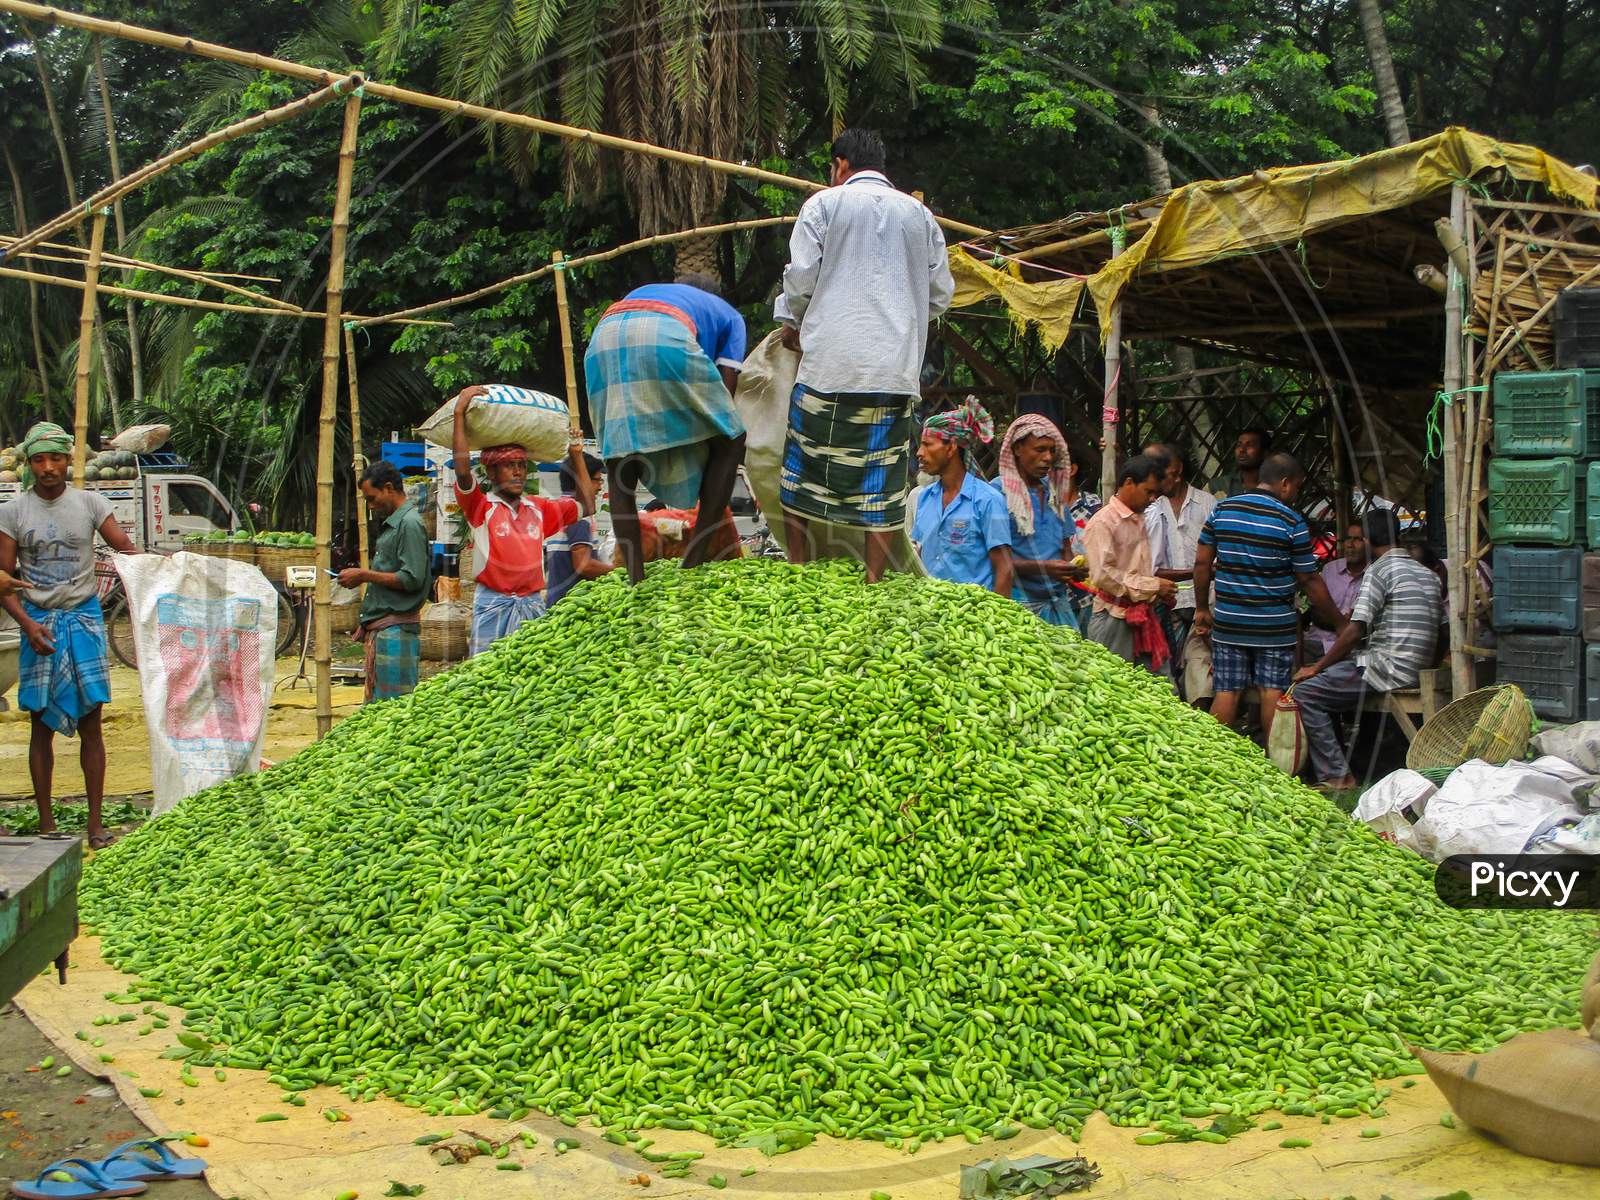 West Bengal , India June 01, 2019 : Indian Street Vegetable Market Is Overflowed With Vegetables , Two Man Are Standing On A Hill Of Vegetables .